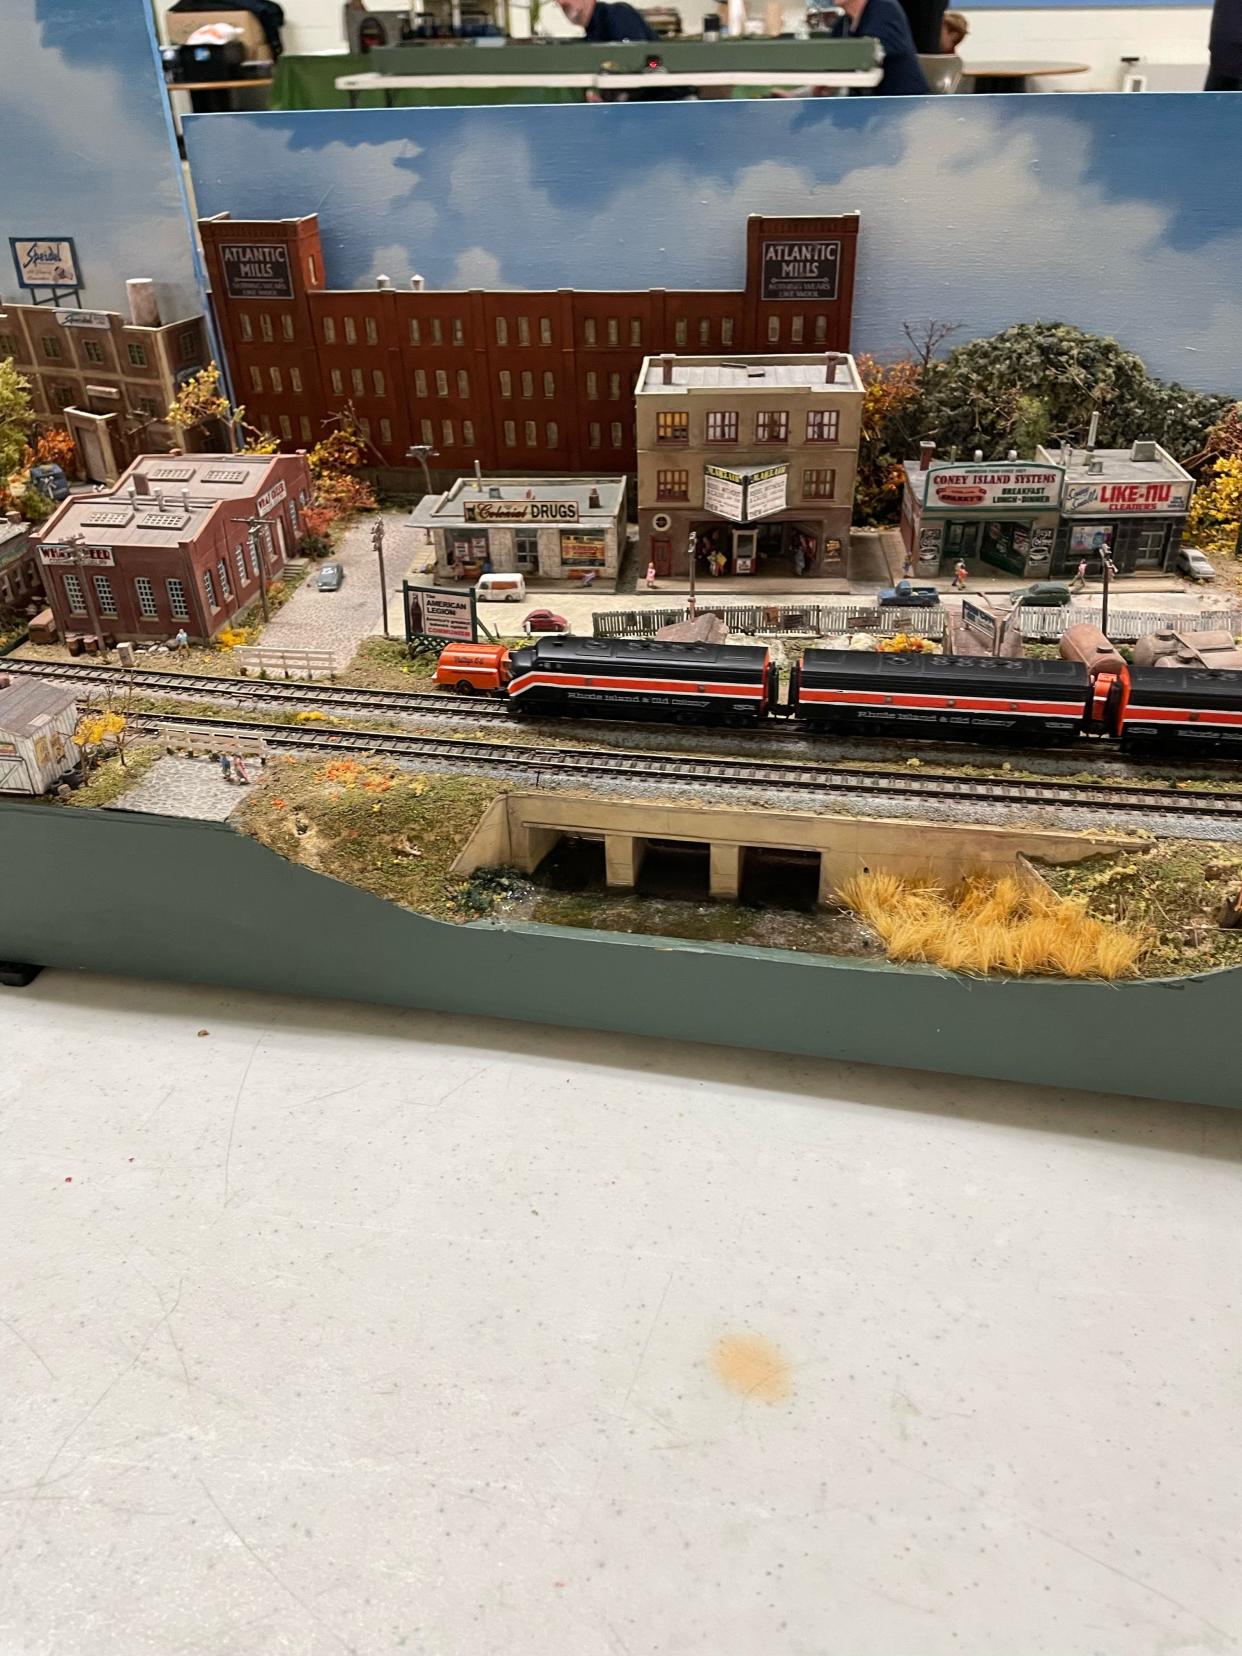 Little Rhody Division will be giving visitors to the Middletown Public Library on Saturday, April 27, a look at model trains in the 21st century. The display will include a T-trak Rhode Island-Old Colony Railroad, N-scale.